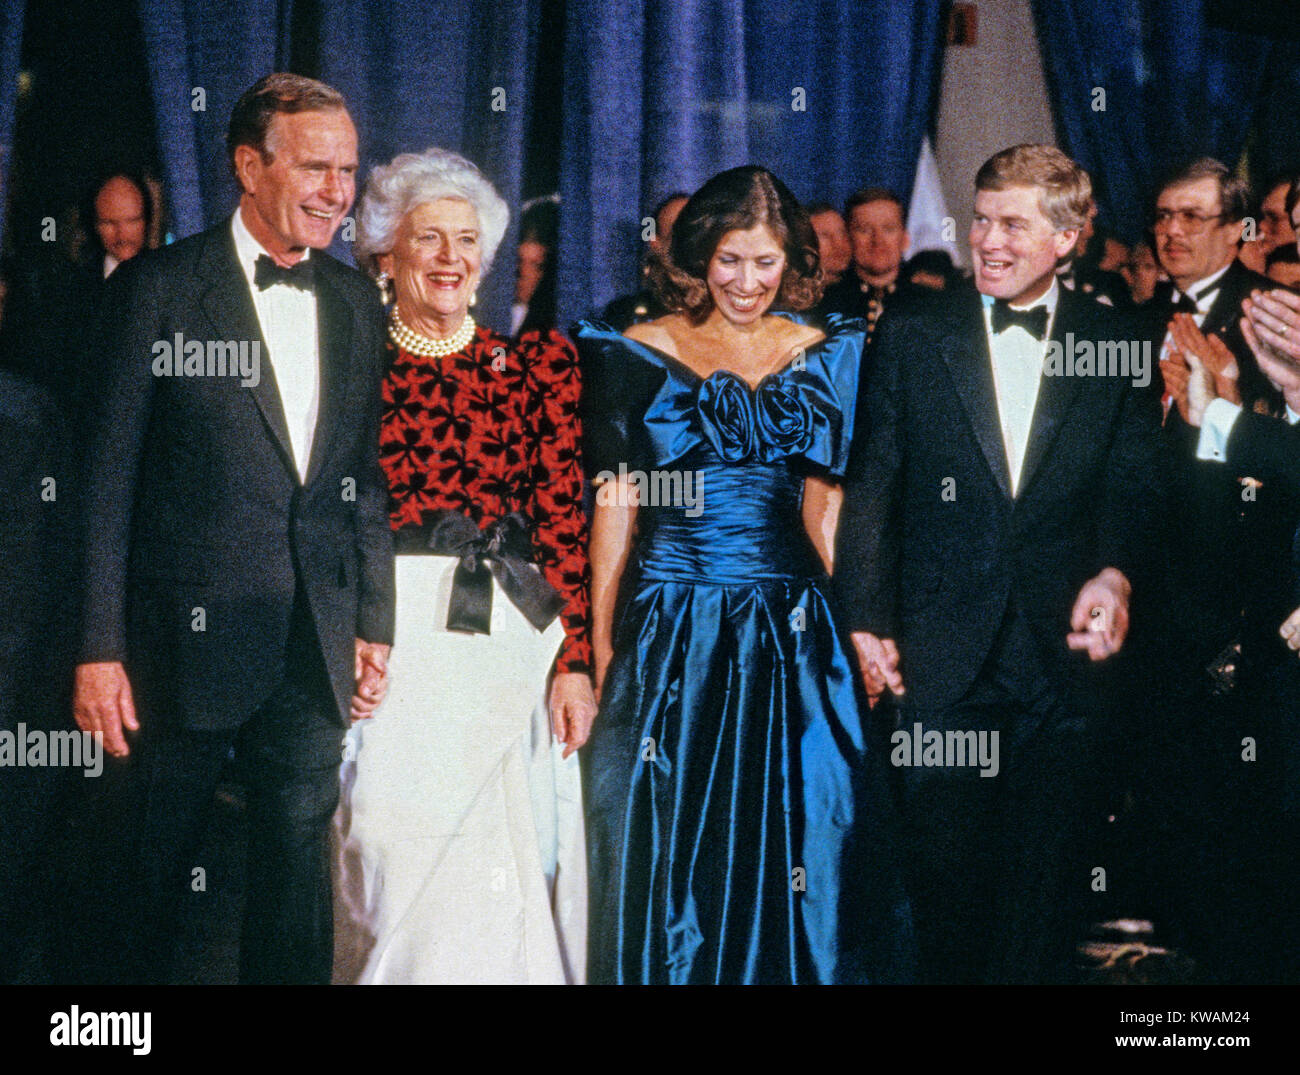 From left to right: United States President-elect George H.W. Bush, Barbara Bush, Marilyn Quayle, and US Vice President-elect Dan Quayle, attends the Inaugural Gala at the Washington DC Convention Center in Washington, DC on January 18 1989. Credit: David Burnett/Pool via CNP - NO WIRE SERVICE - Photo: David Burnett/Consolidated/dpa Stock Photo